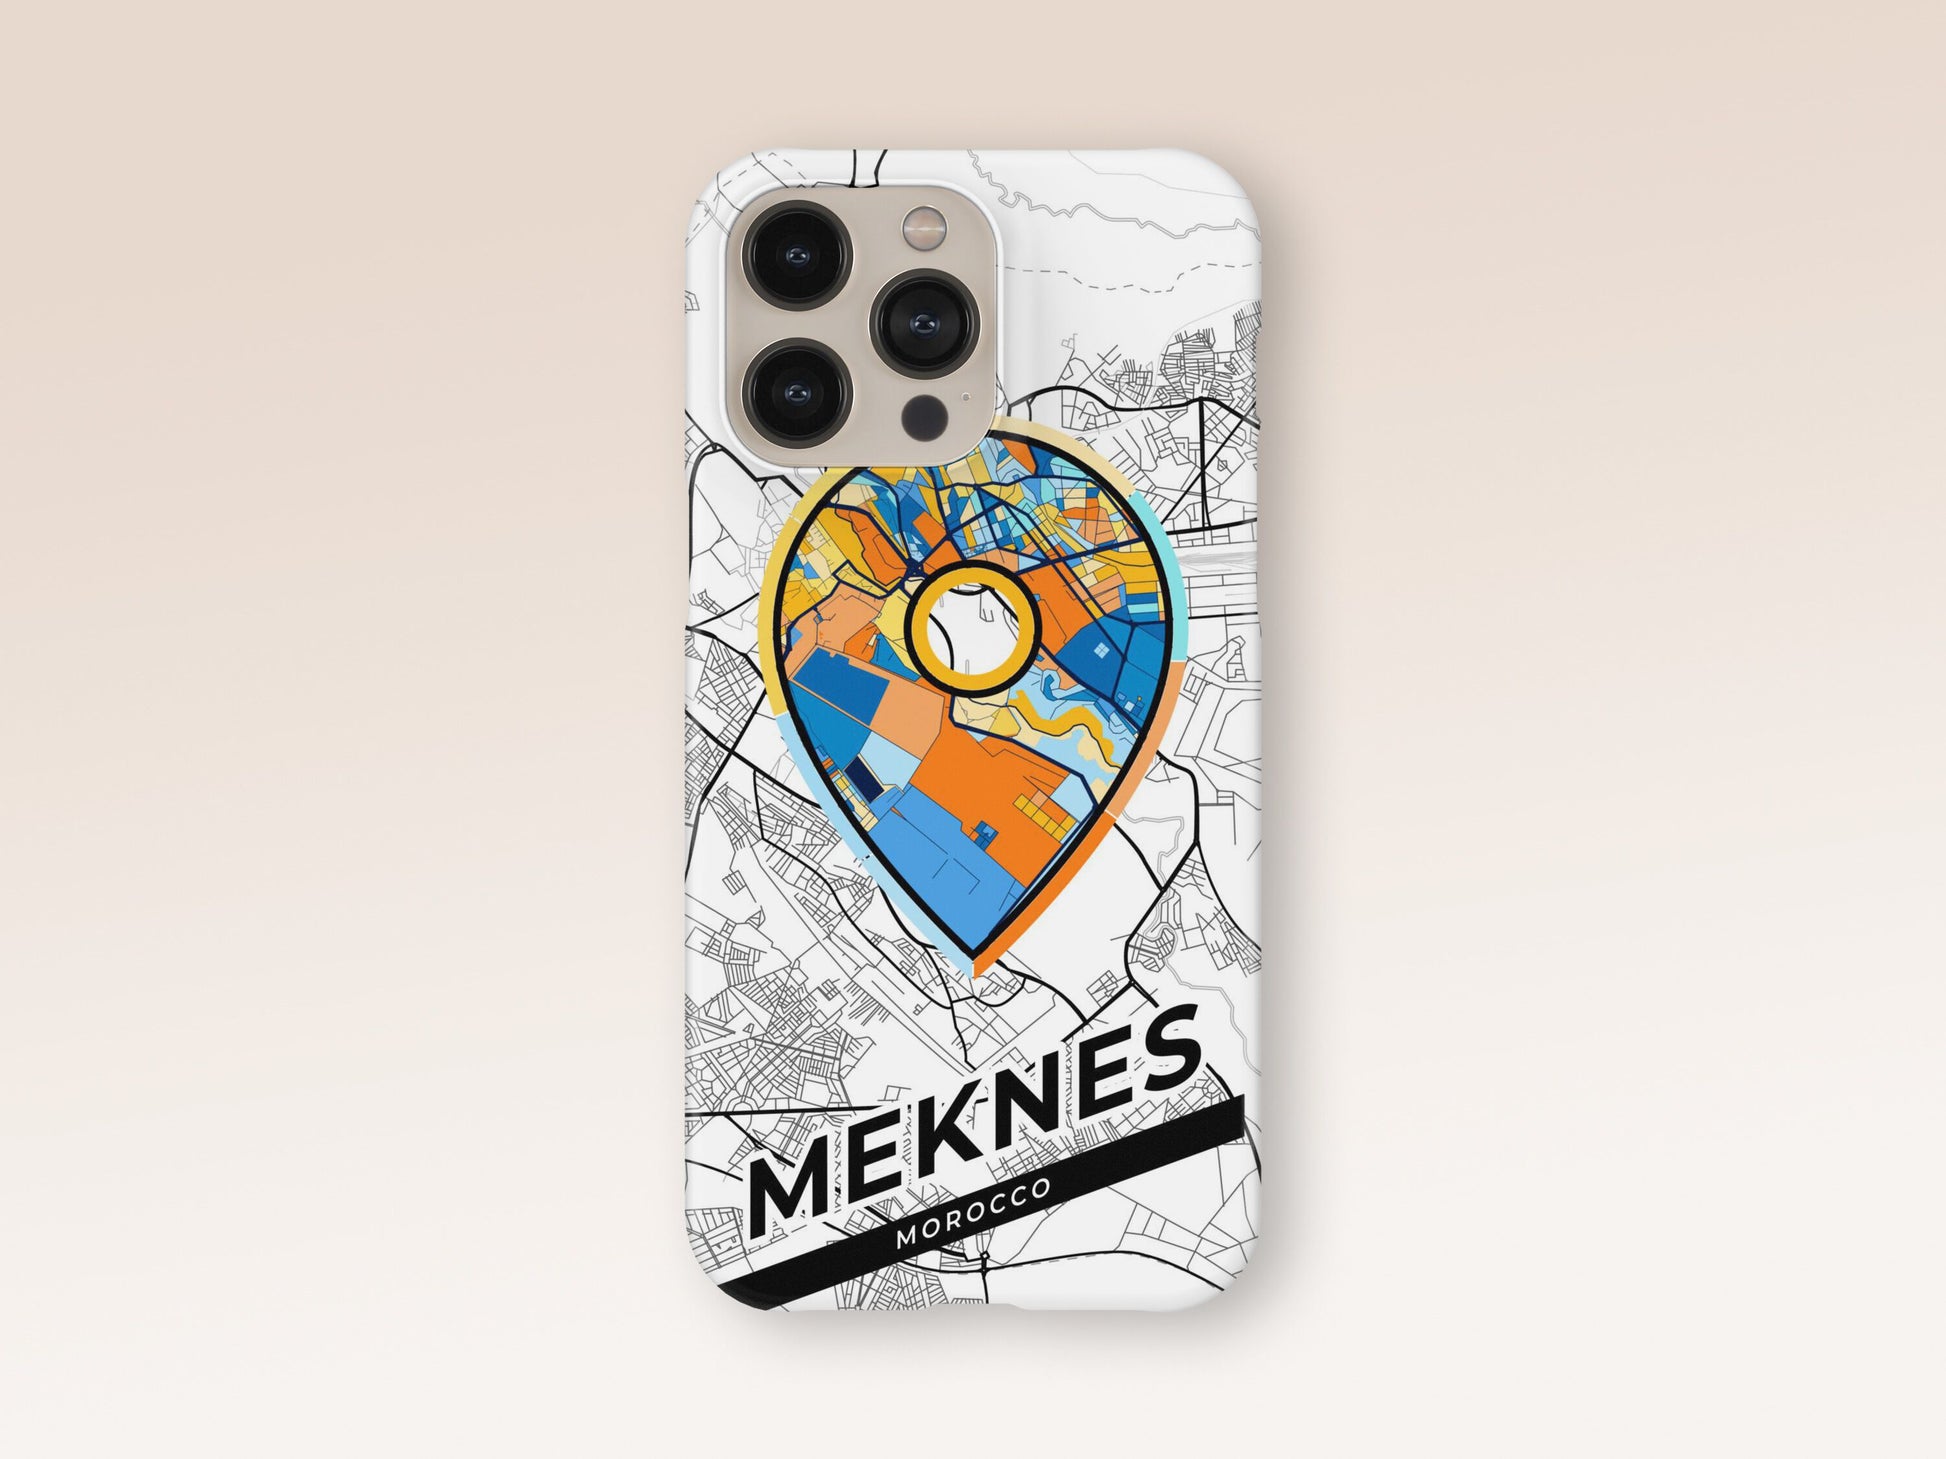 Meknes Morocco slim phone case with colorful icon 1